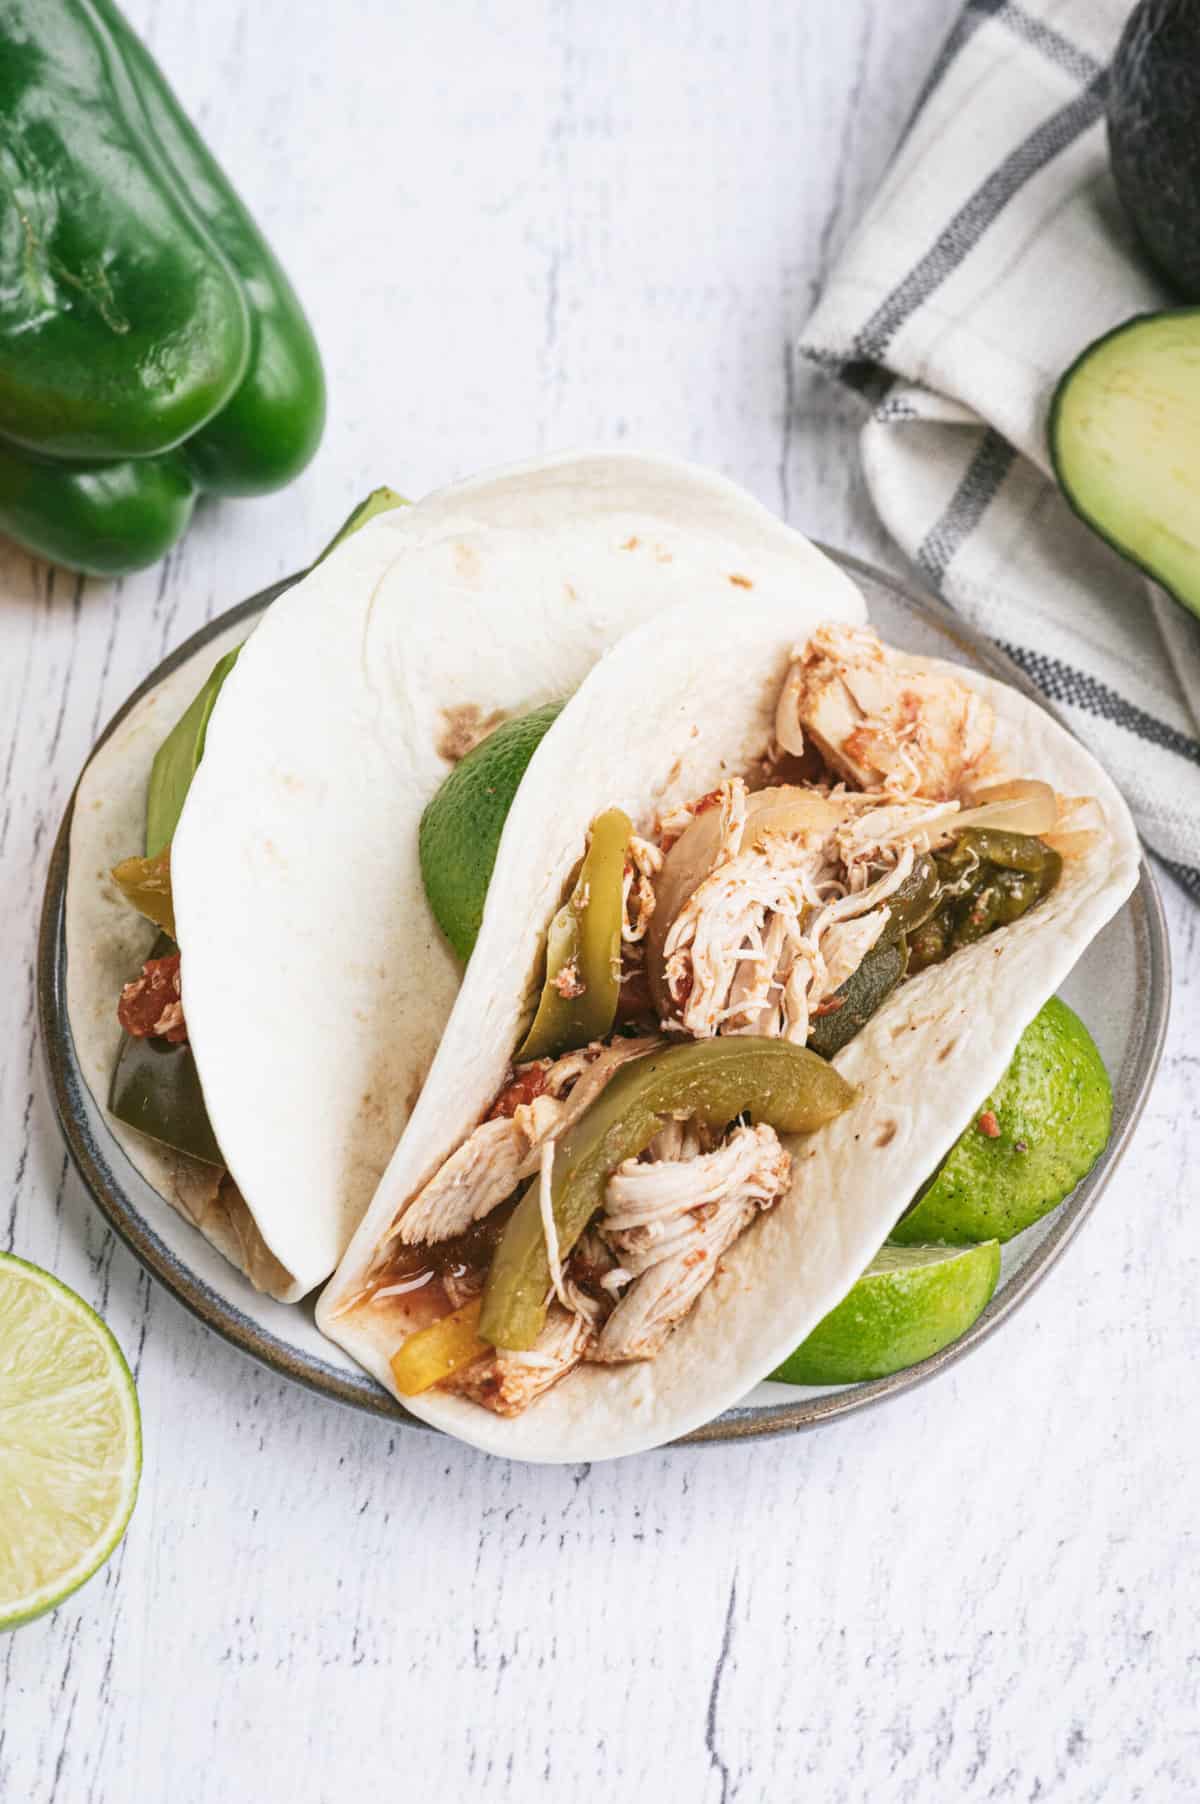 White corn tortillas with crockpot chicken fajitas inside on a plate with sliced lime.